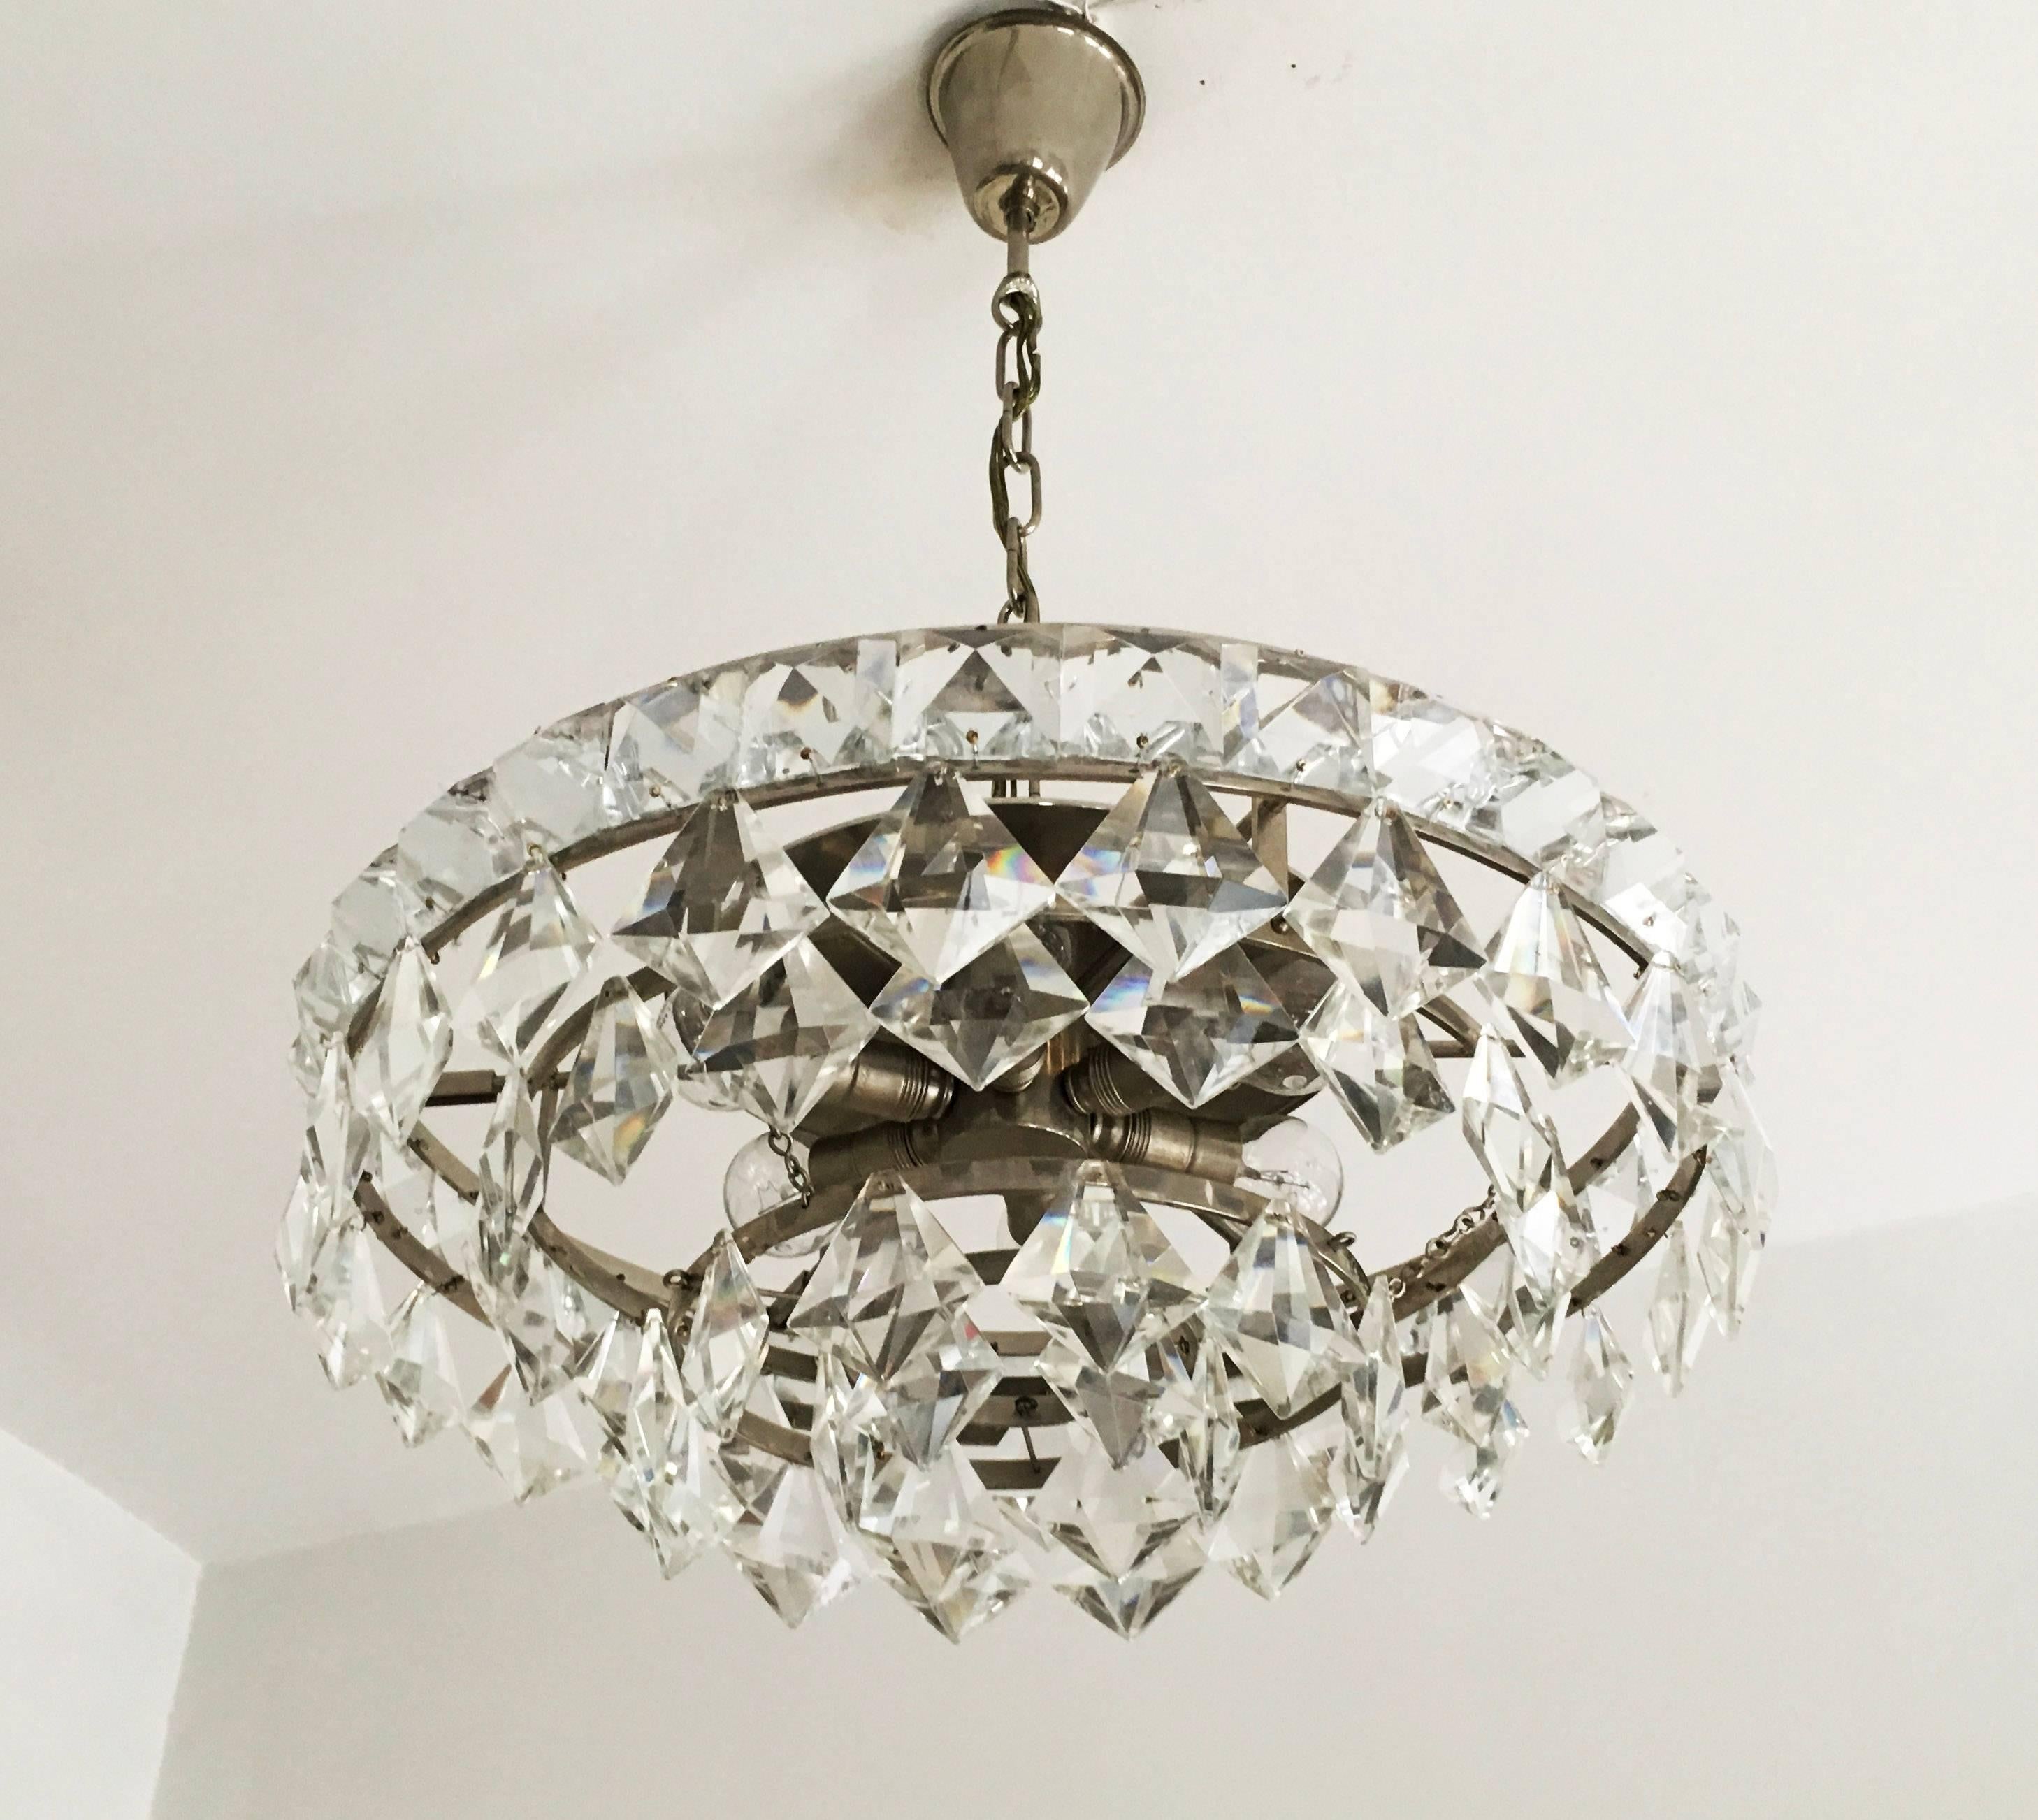 Austrian Cat Crystal Chandelier In Excellent Condition For Sale In Vienna, AT